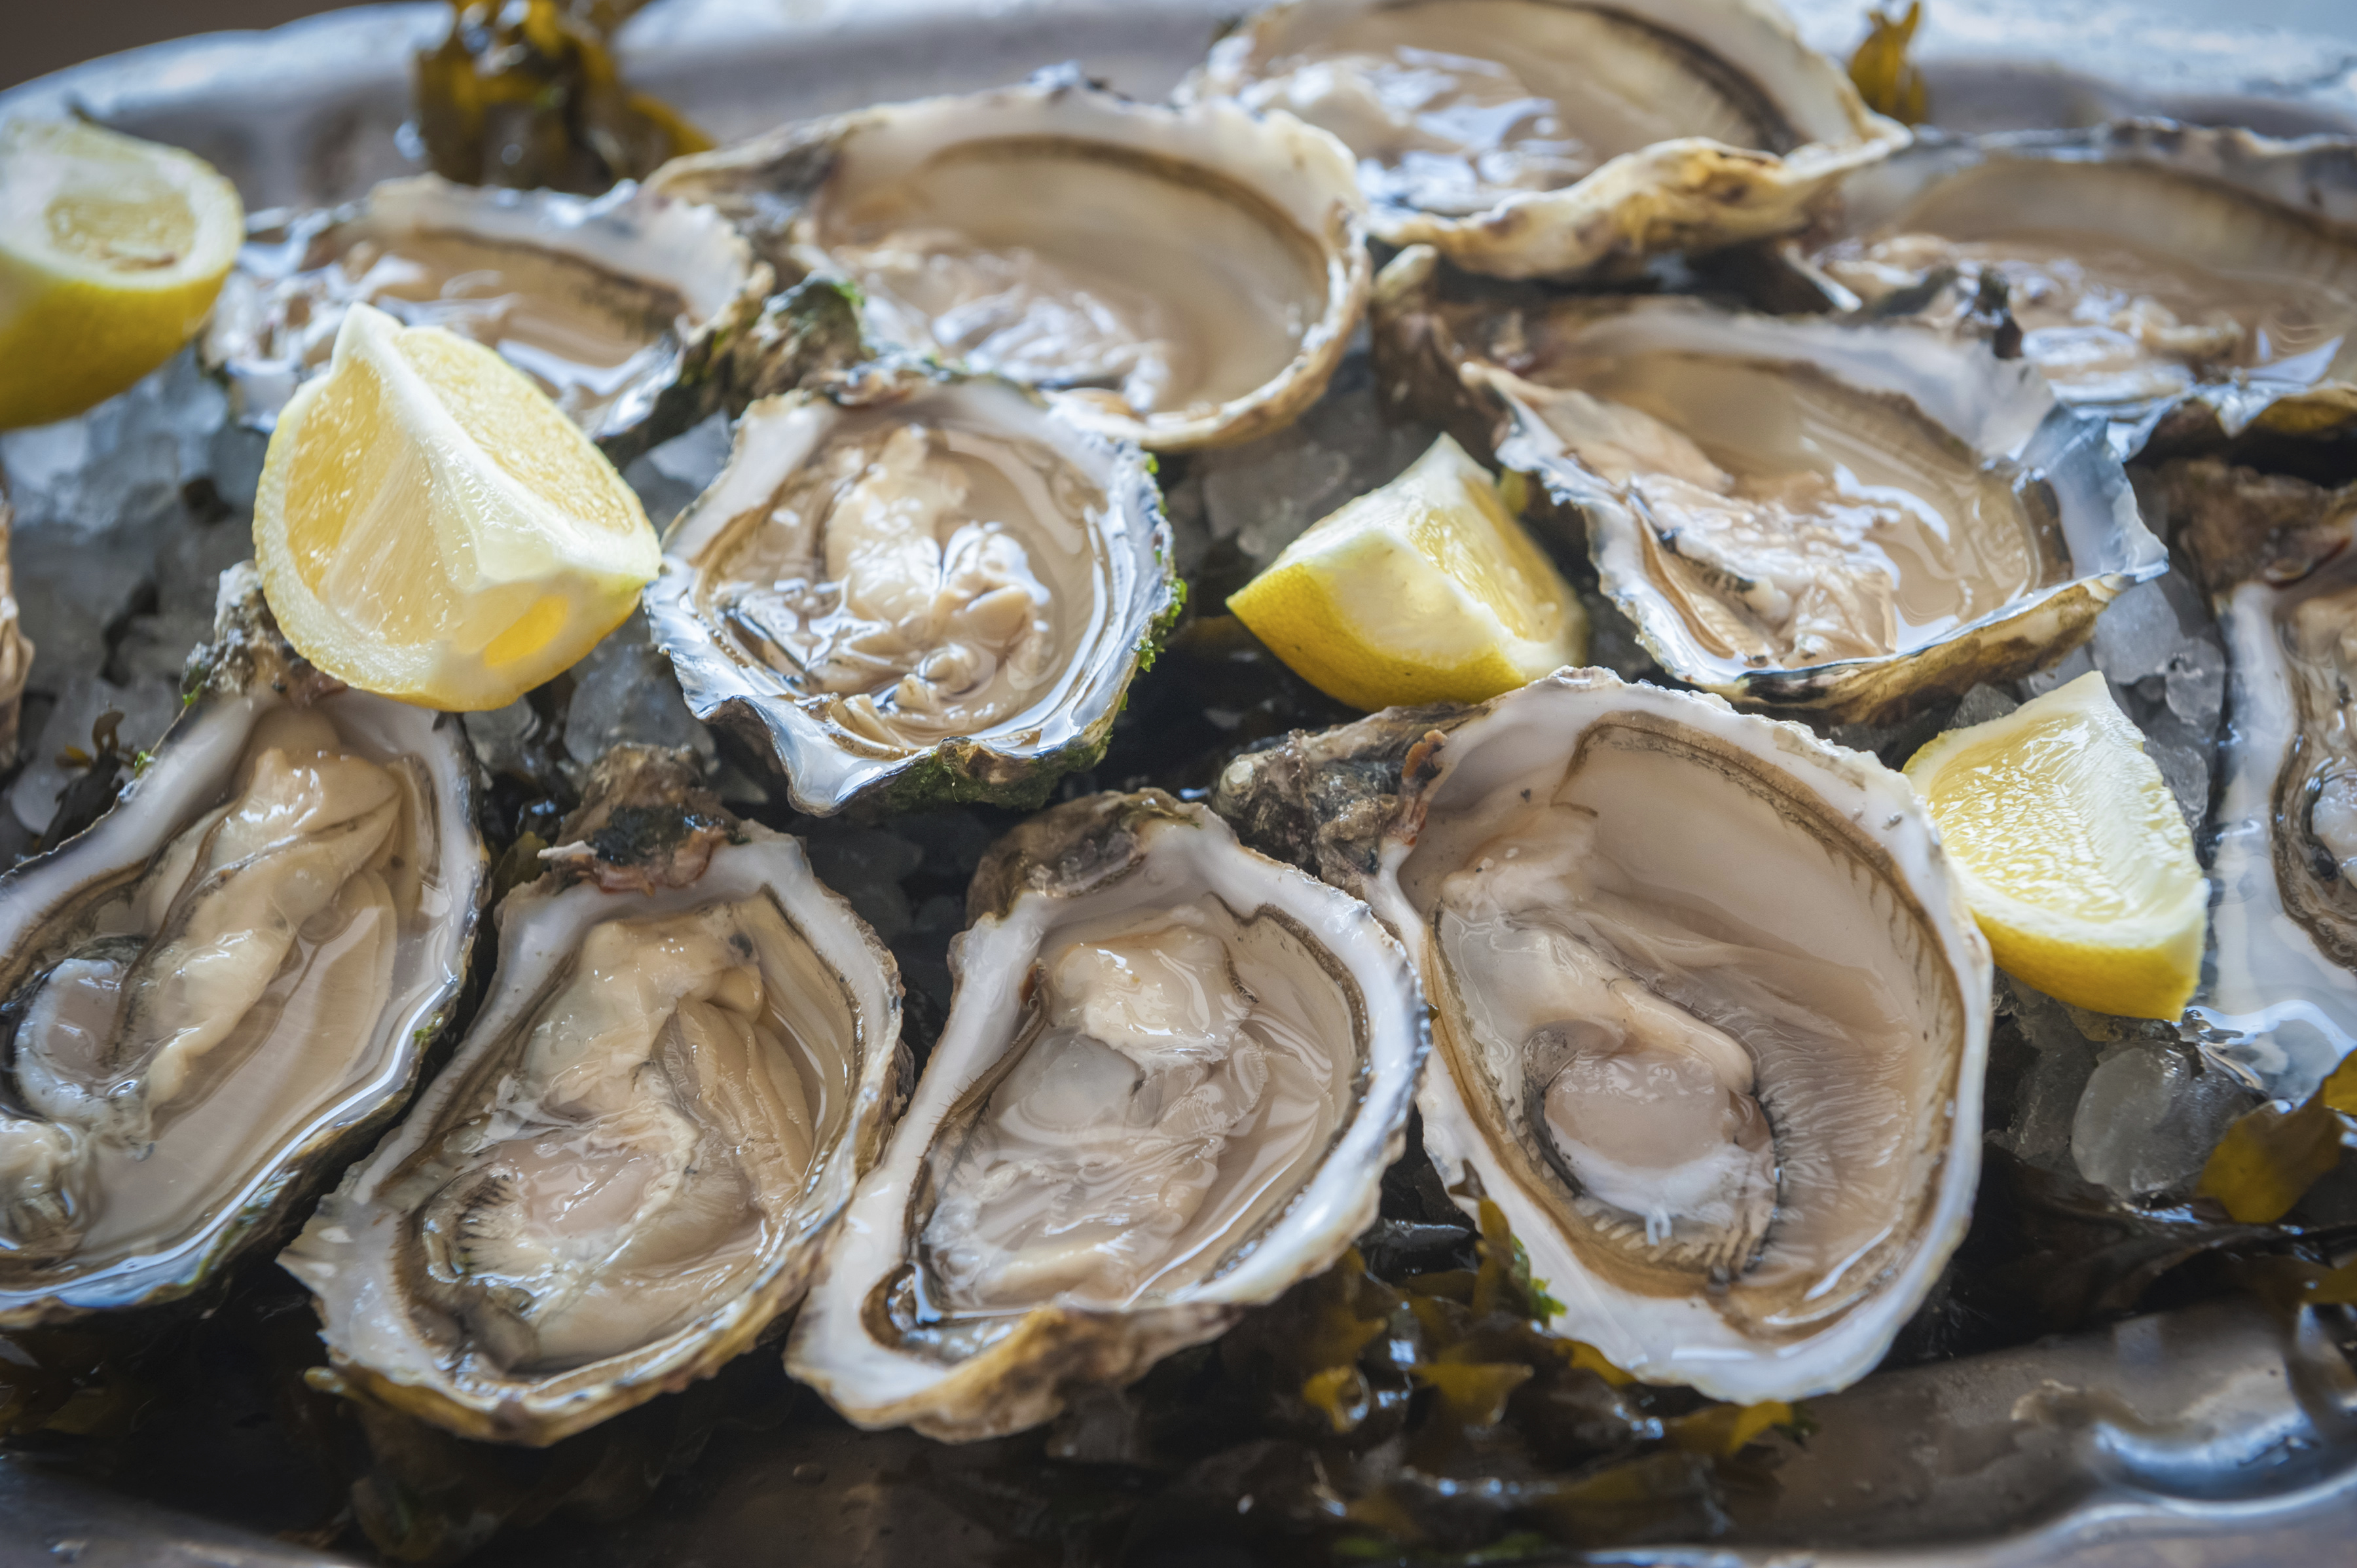 The Best Places to Get Oysters on the Cape